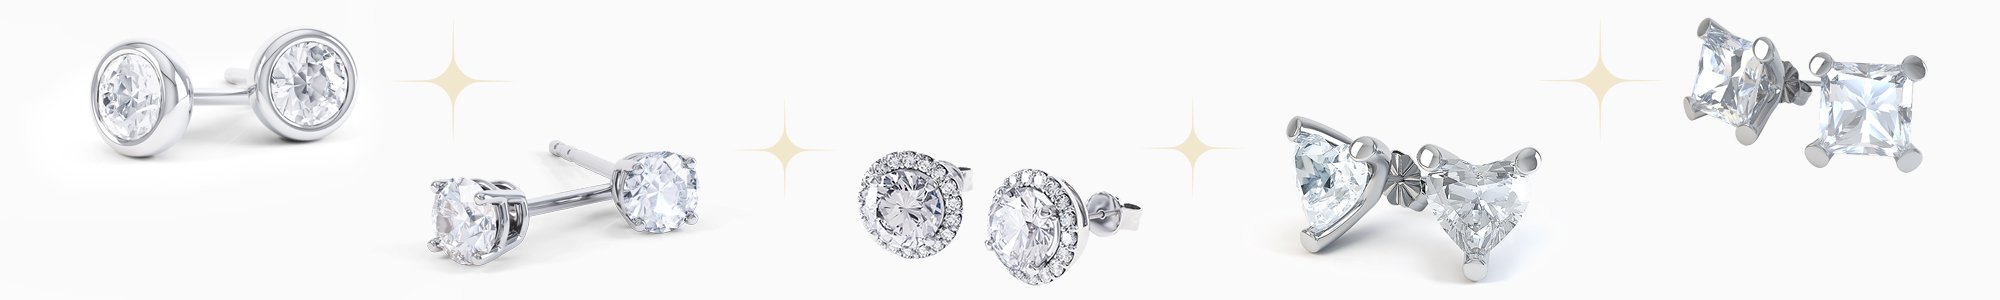 Shop Silver Earrings by Jian London. Buy direct and save from our wide selection of Silver Earrings at the Jian London jewelry Store. Free US Delivery